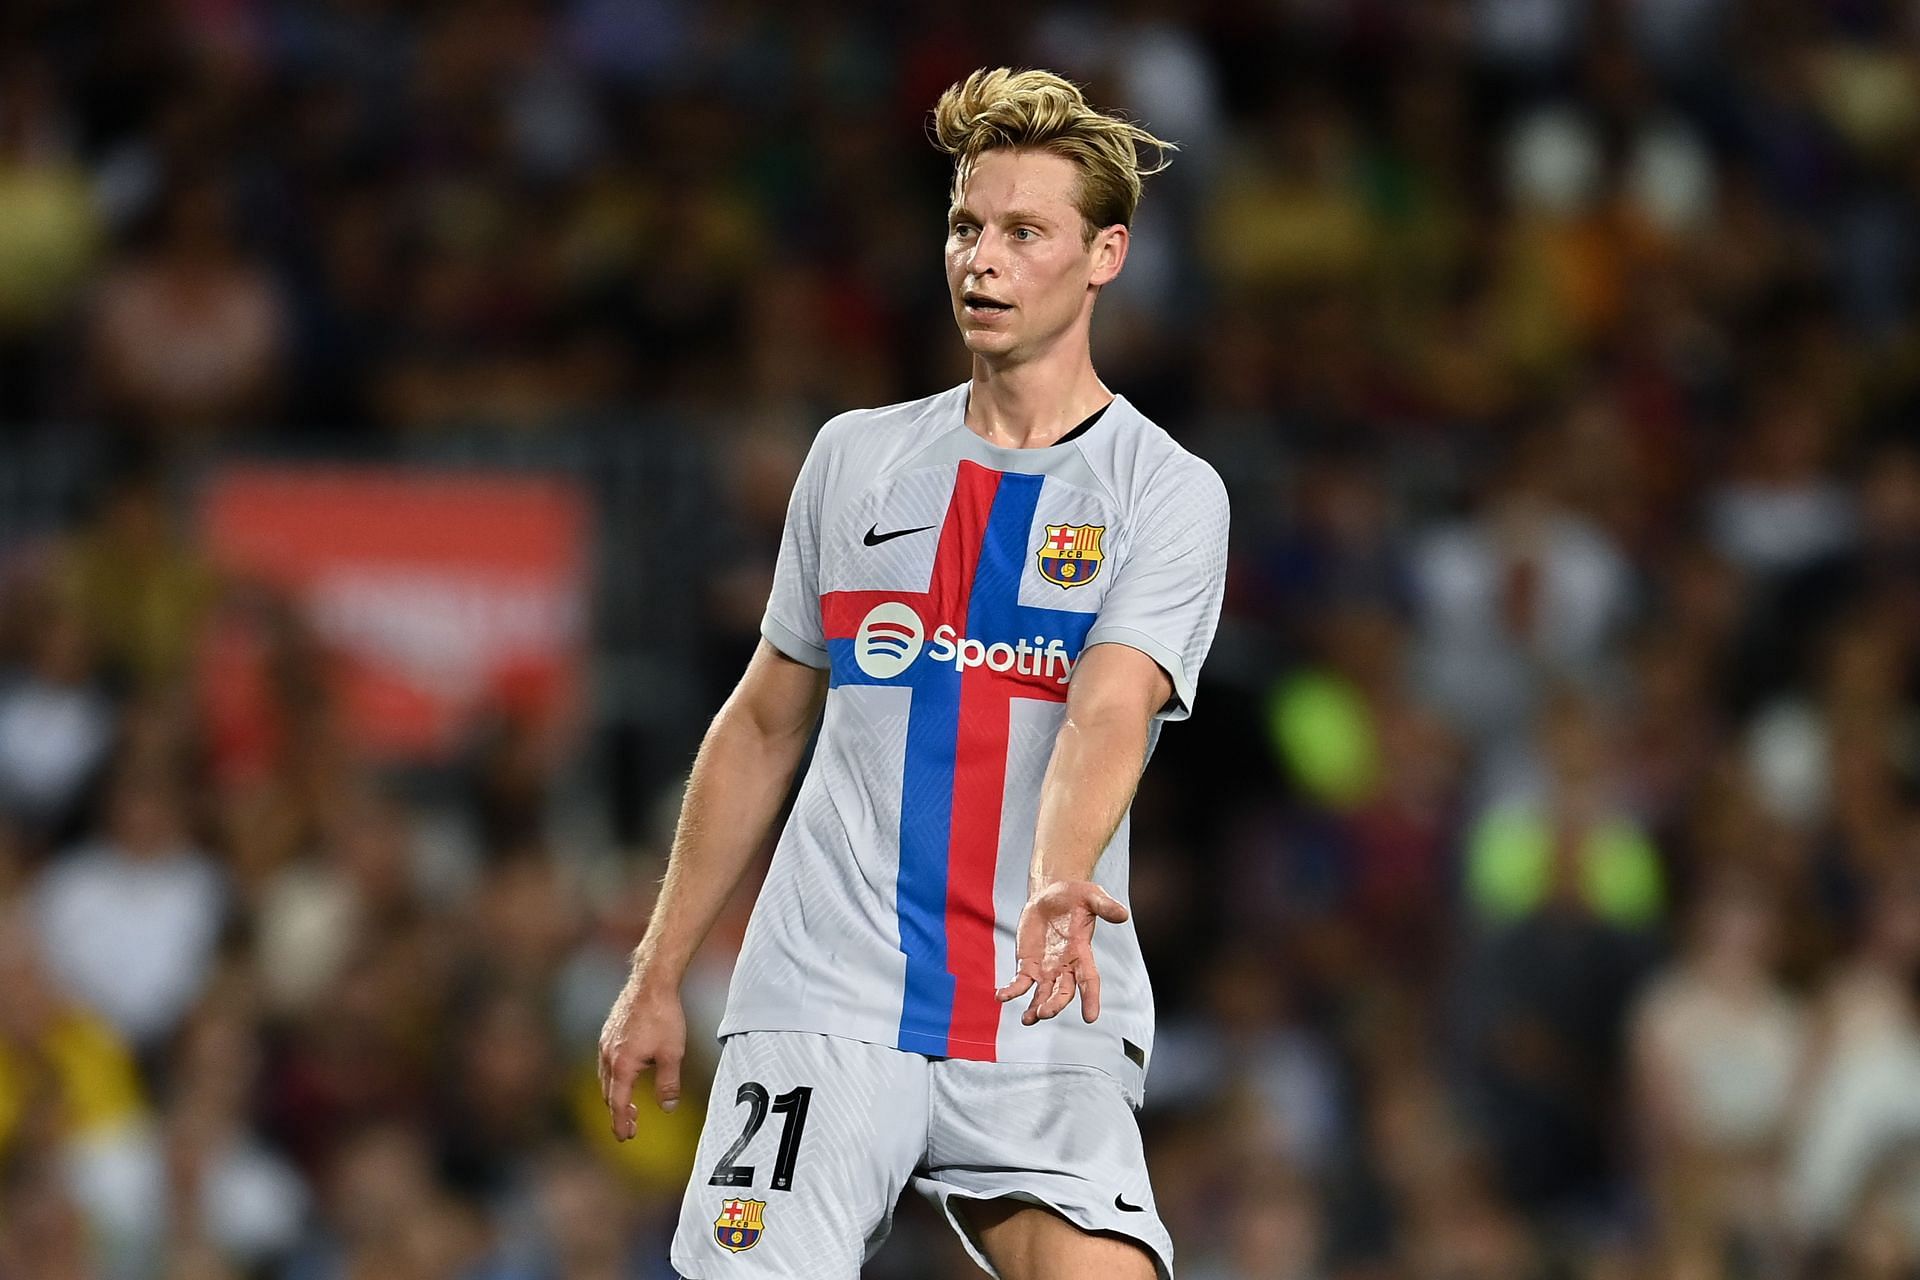 Frenkie de Jong has admirers at Old Trafford.